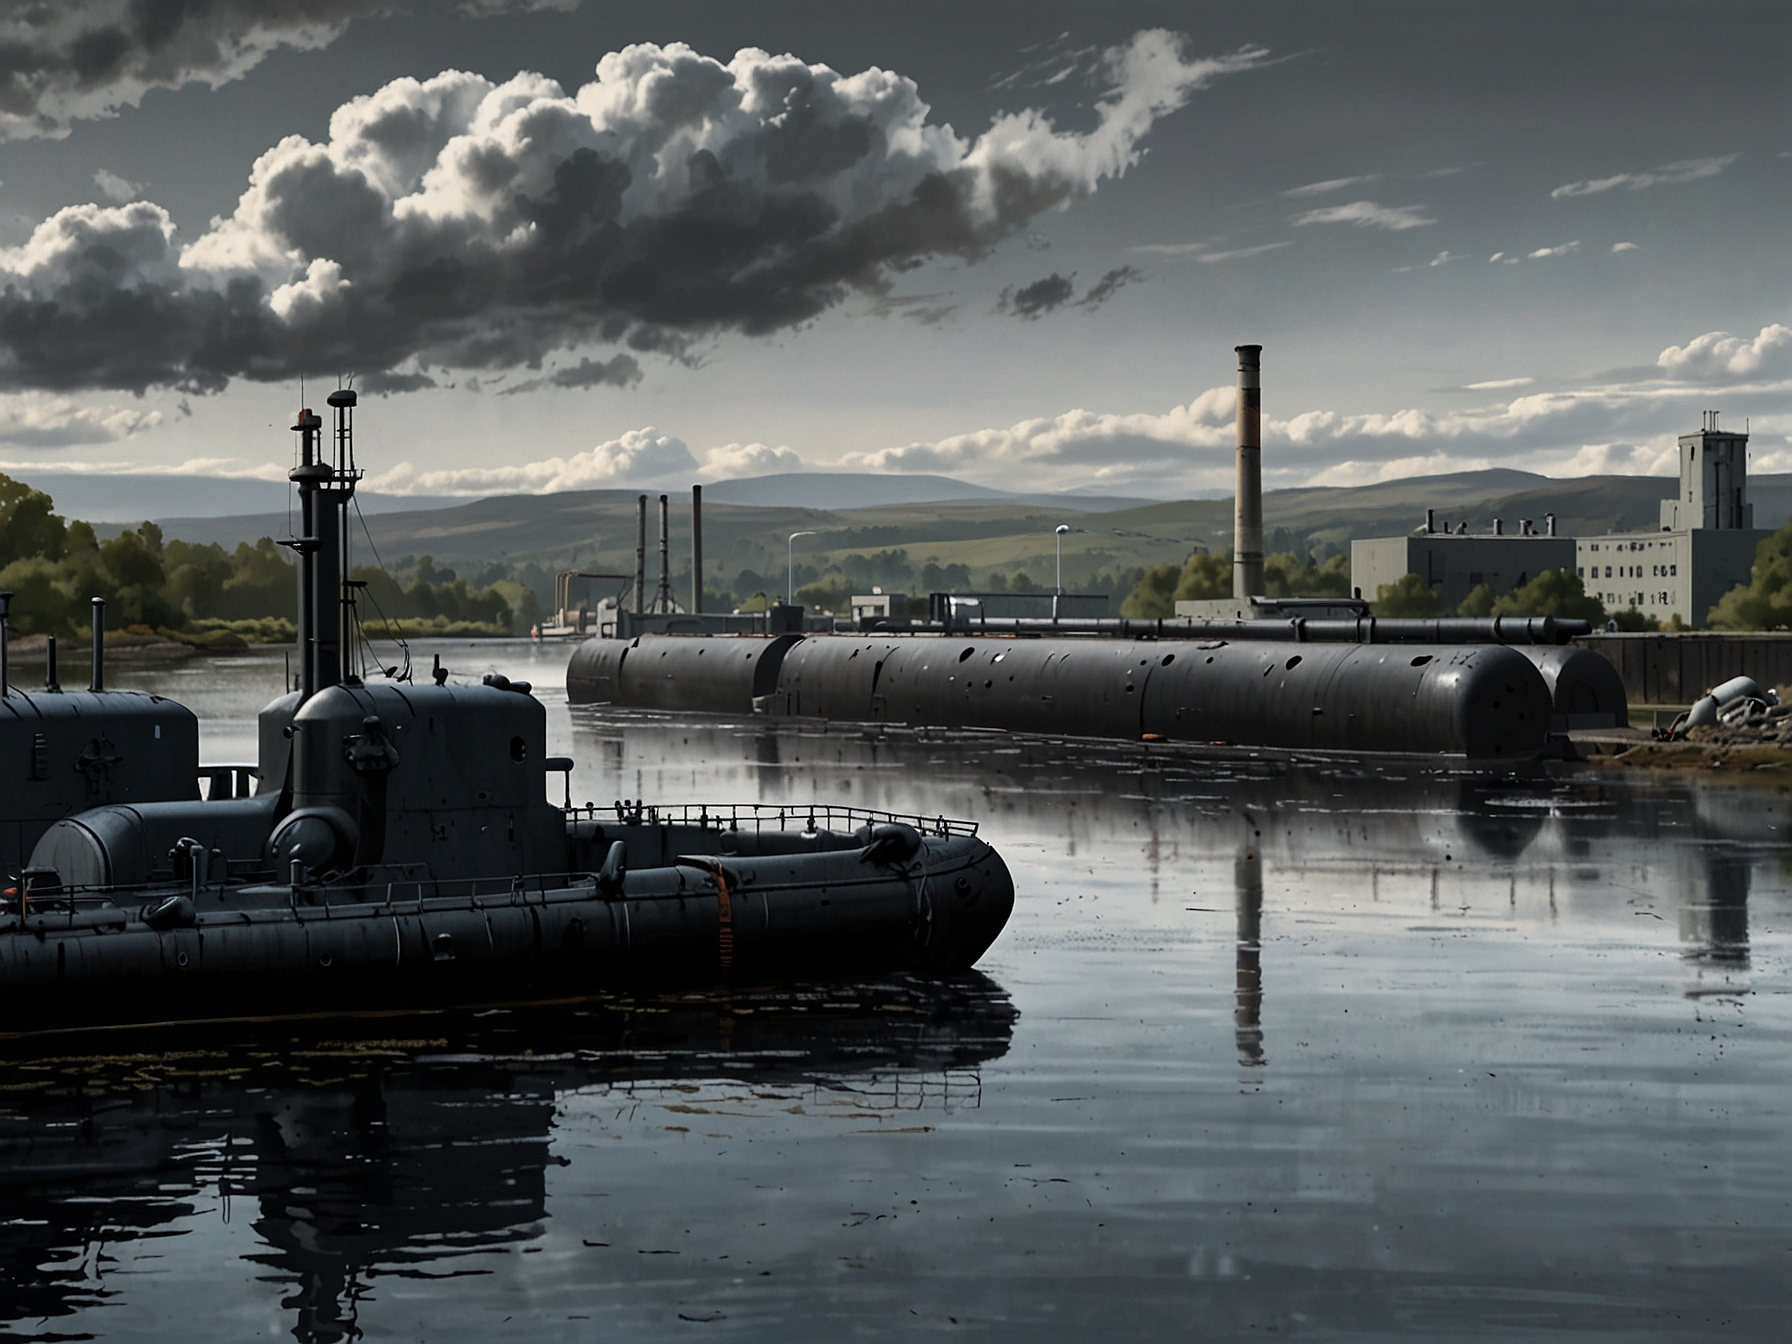 A striking image of the Clyde River with a backdrop of a naval base housing submarines, symbolizing the controversial presence of the 220 nuclear bombs mentioned in the article.